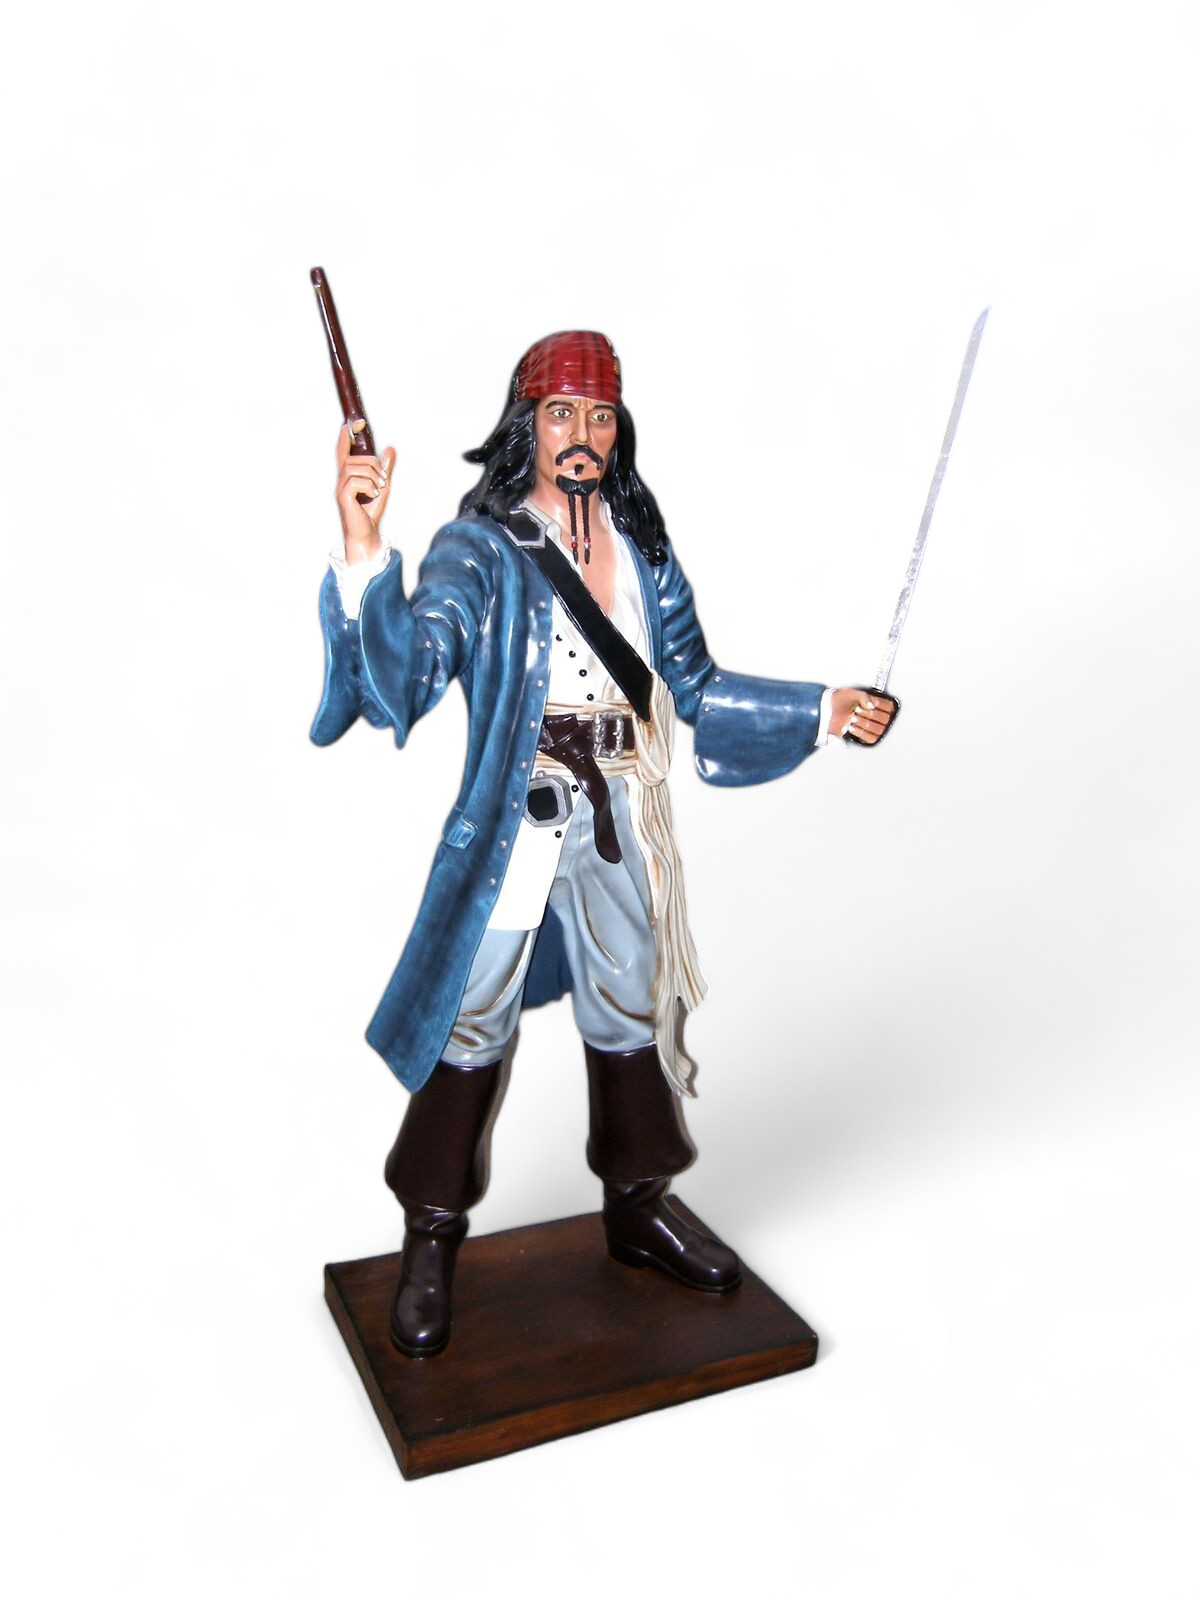 Cannon Life Size Statue - Large Life Size Cannon - Pirate Decor -  Indoor/Outdoor